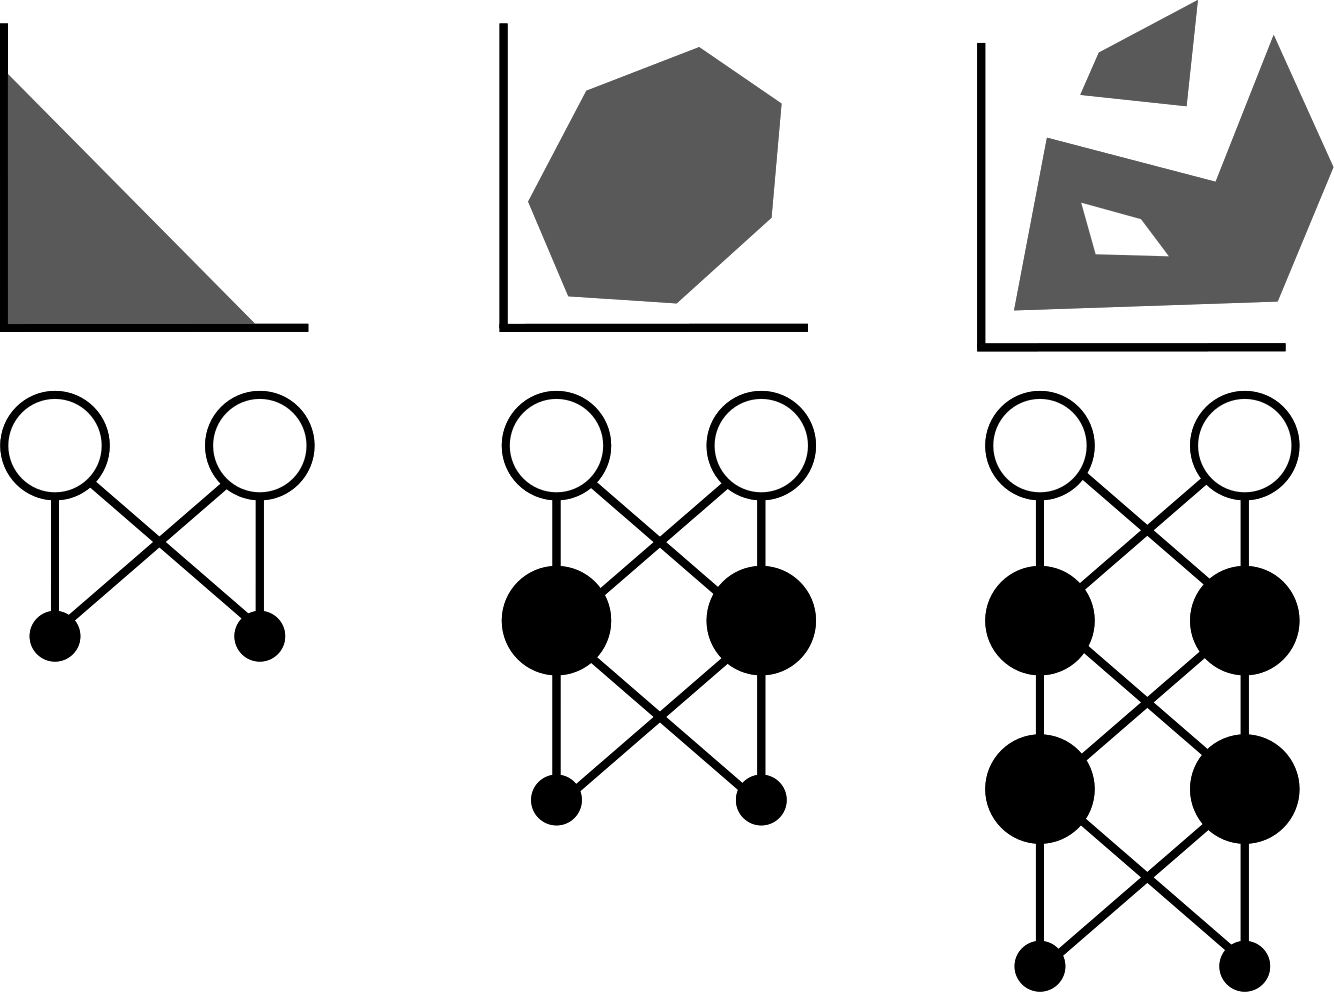 An illustration how more complex network solves more complex classification prblems.